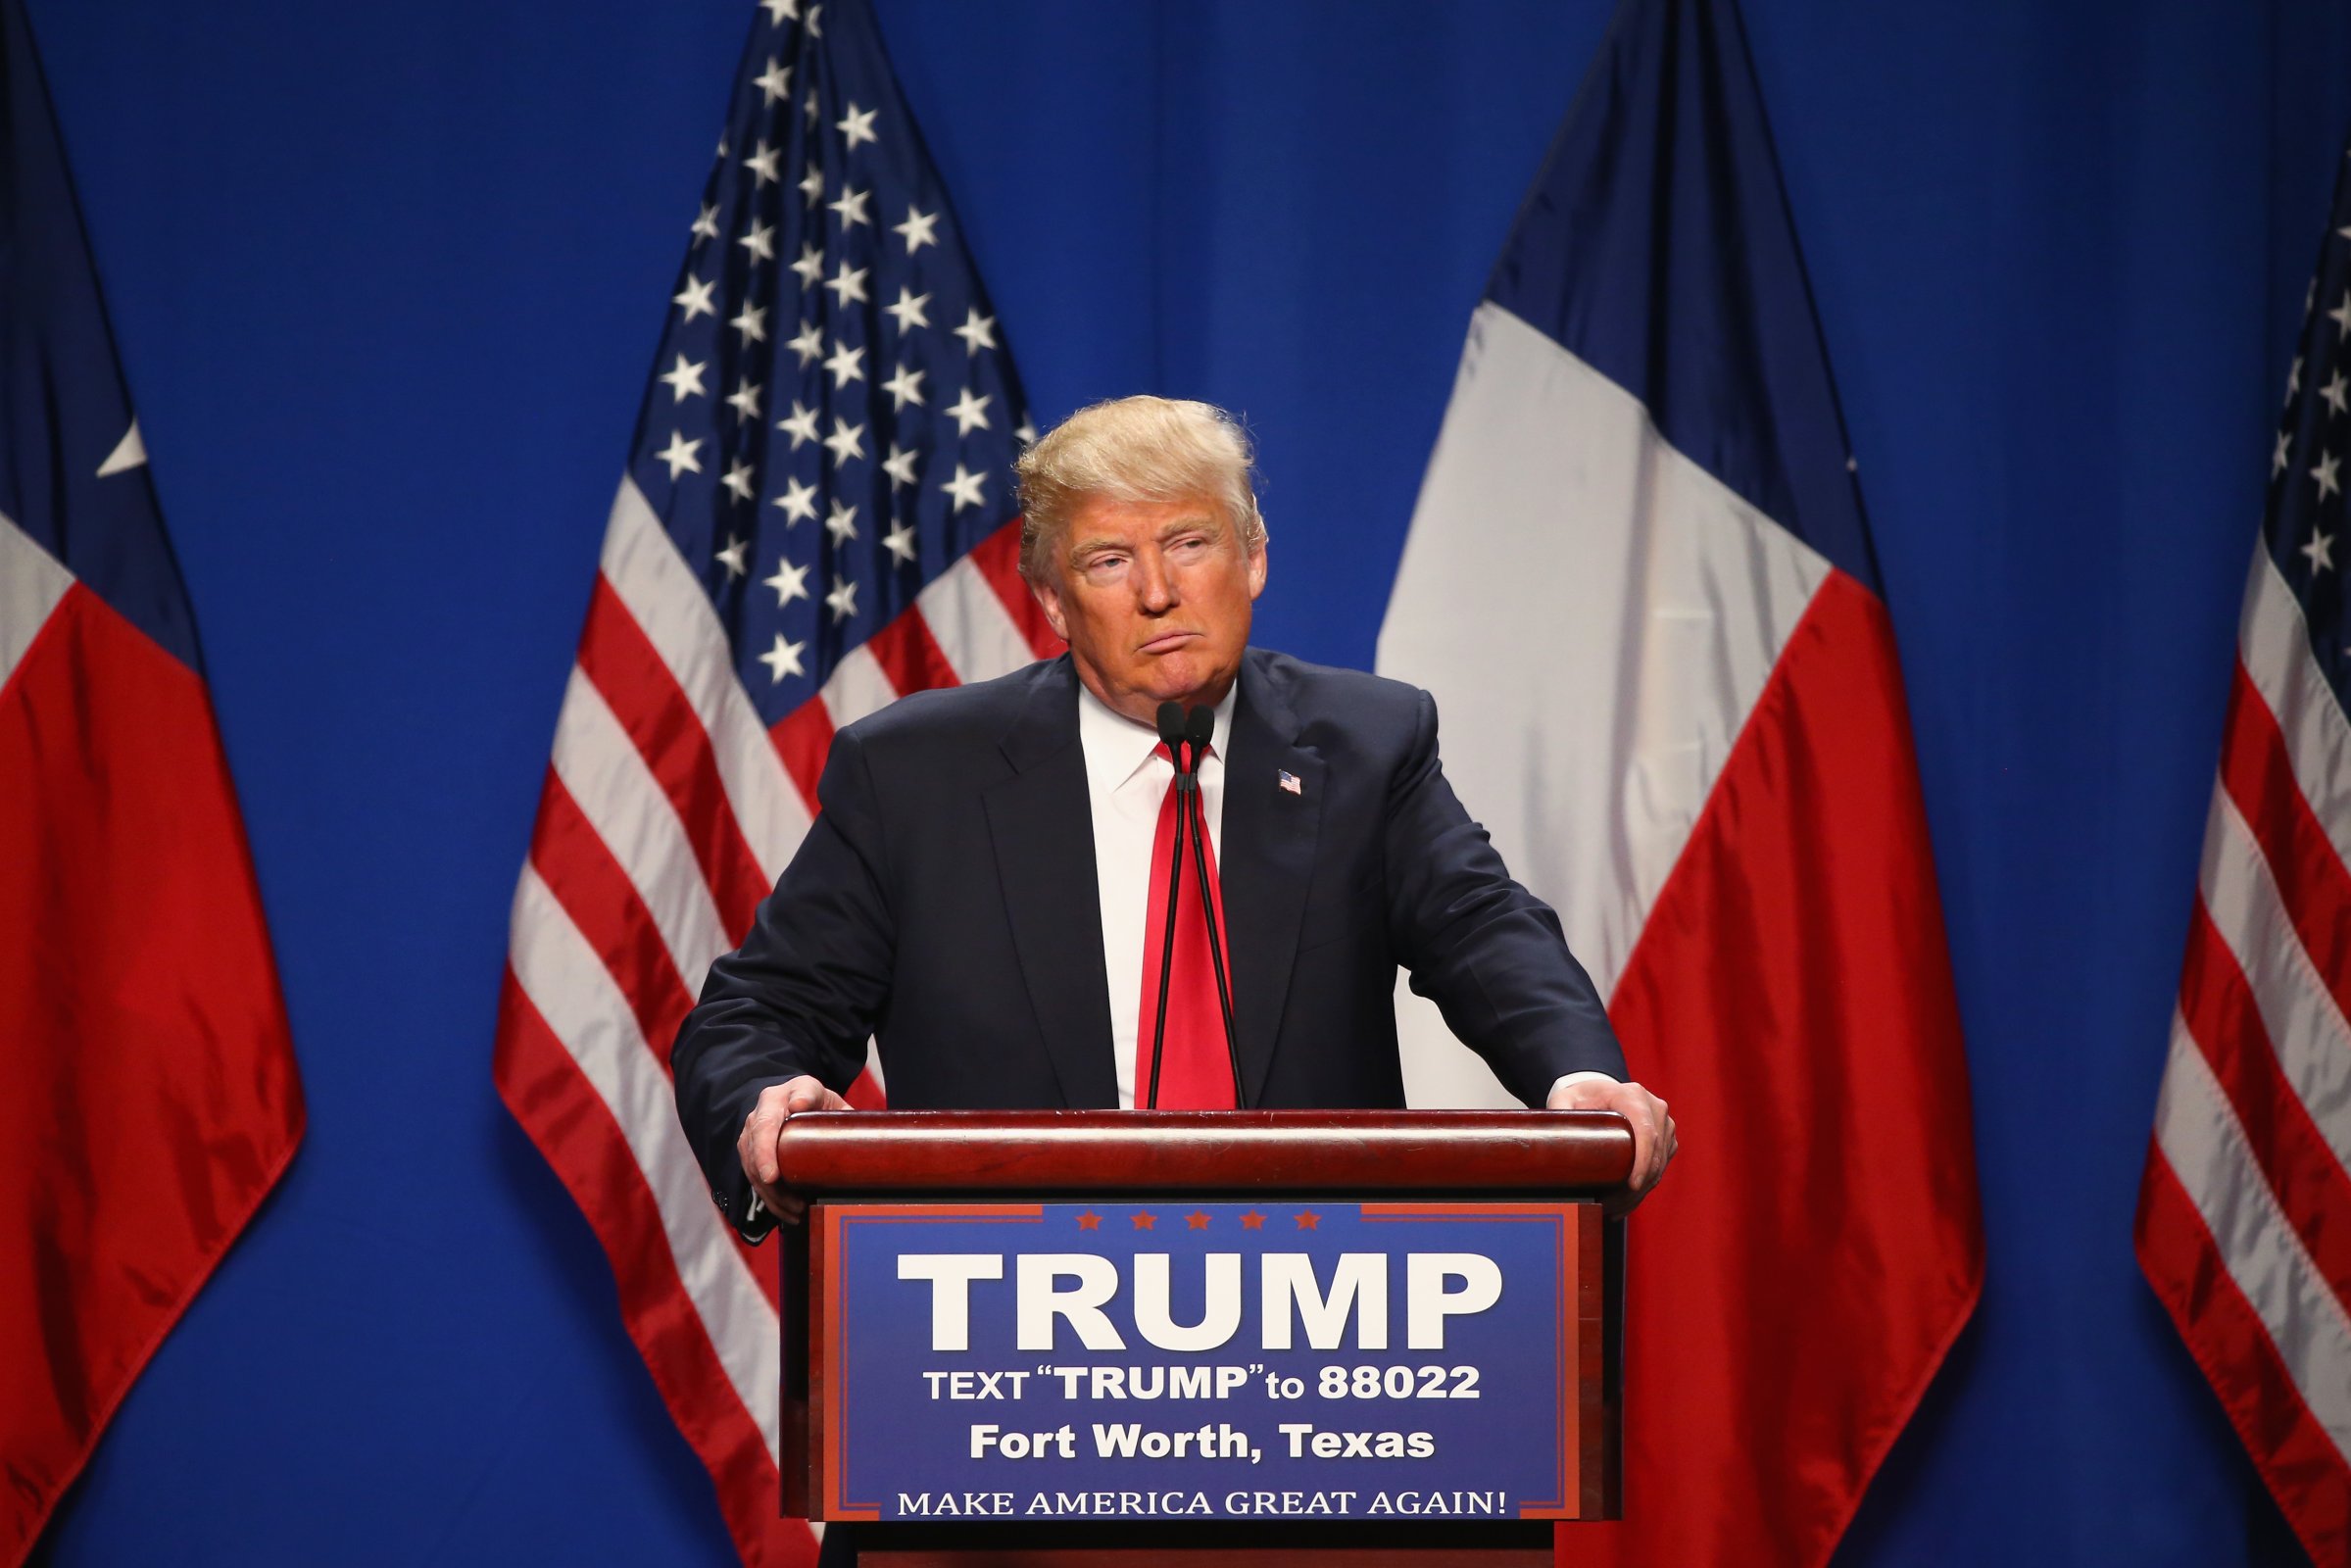 Republican presidential candidate Donald Trump speaks at a rally in Fort Worth, Texas, Feb. 26, 2016.